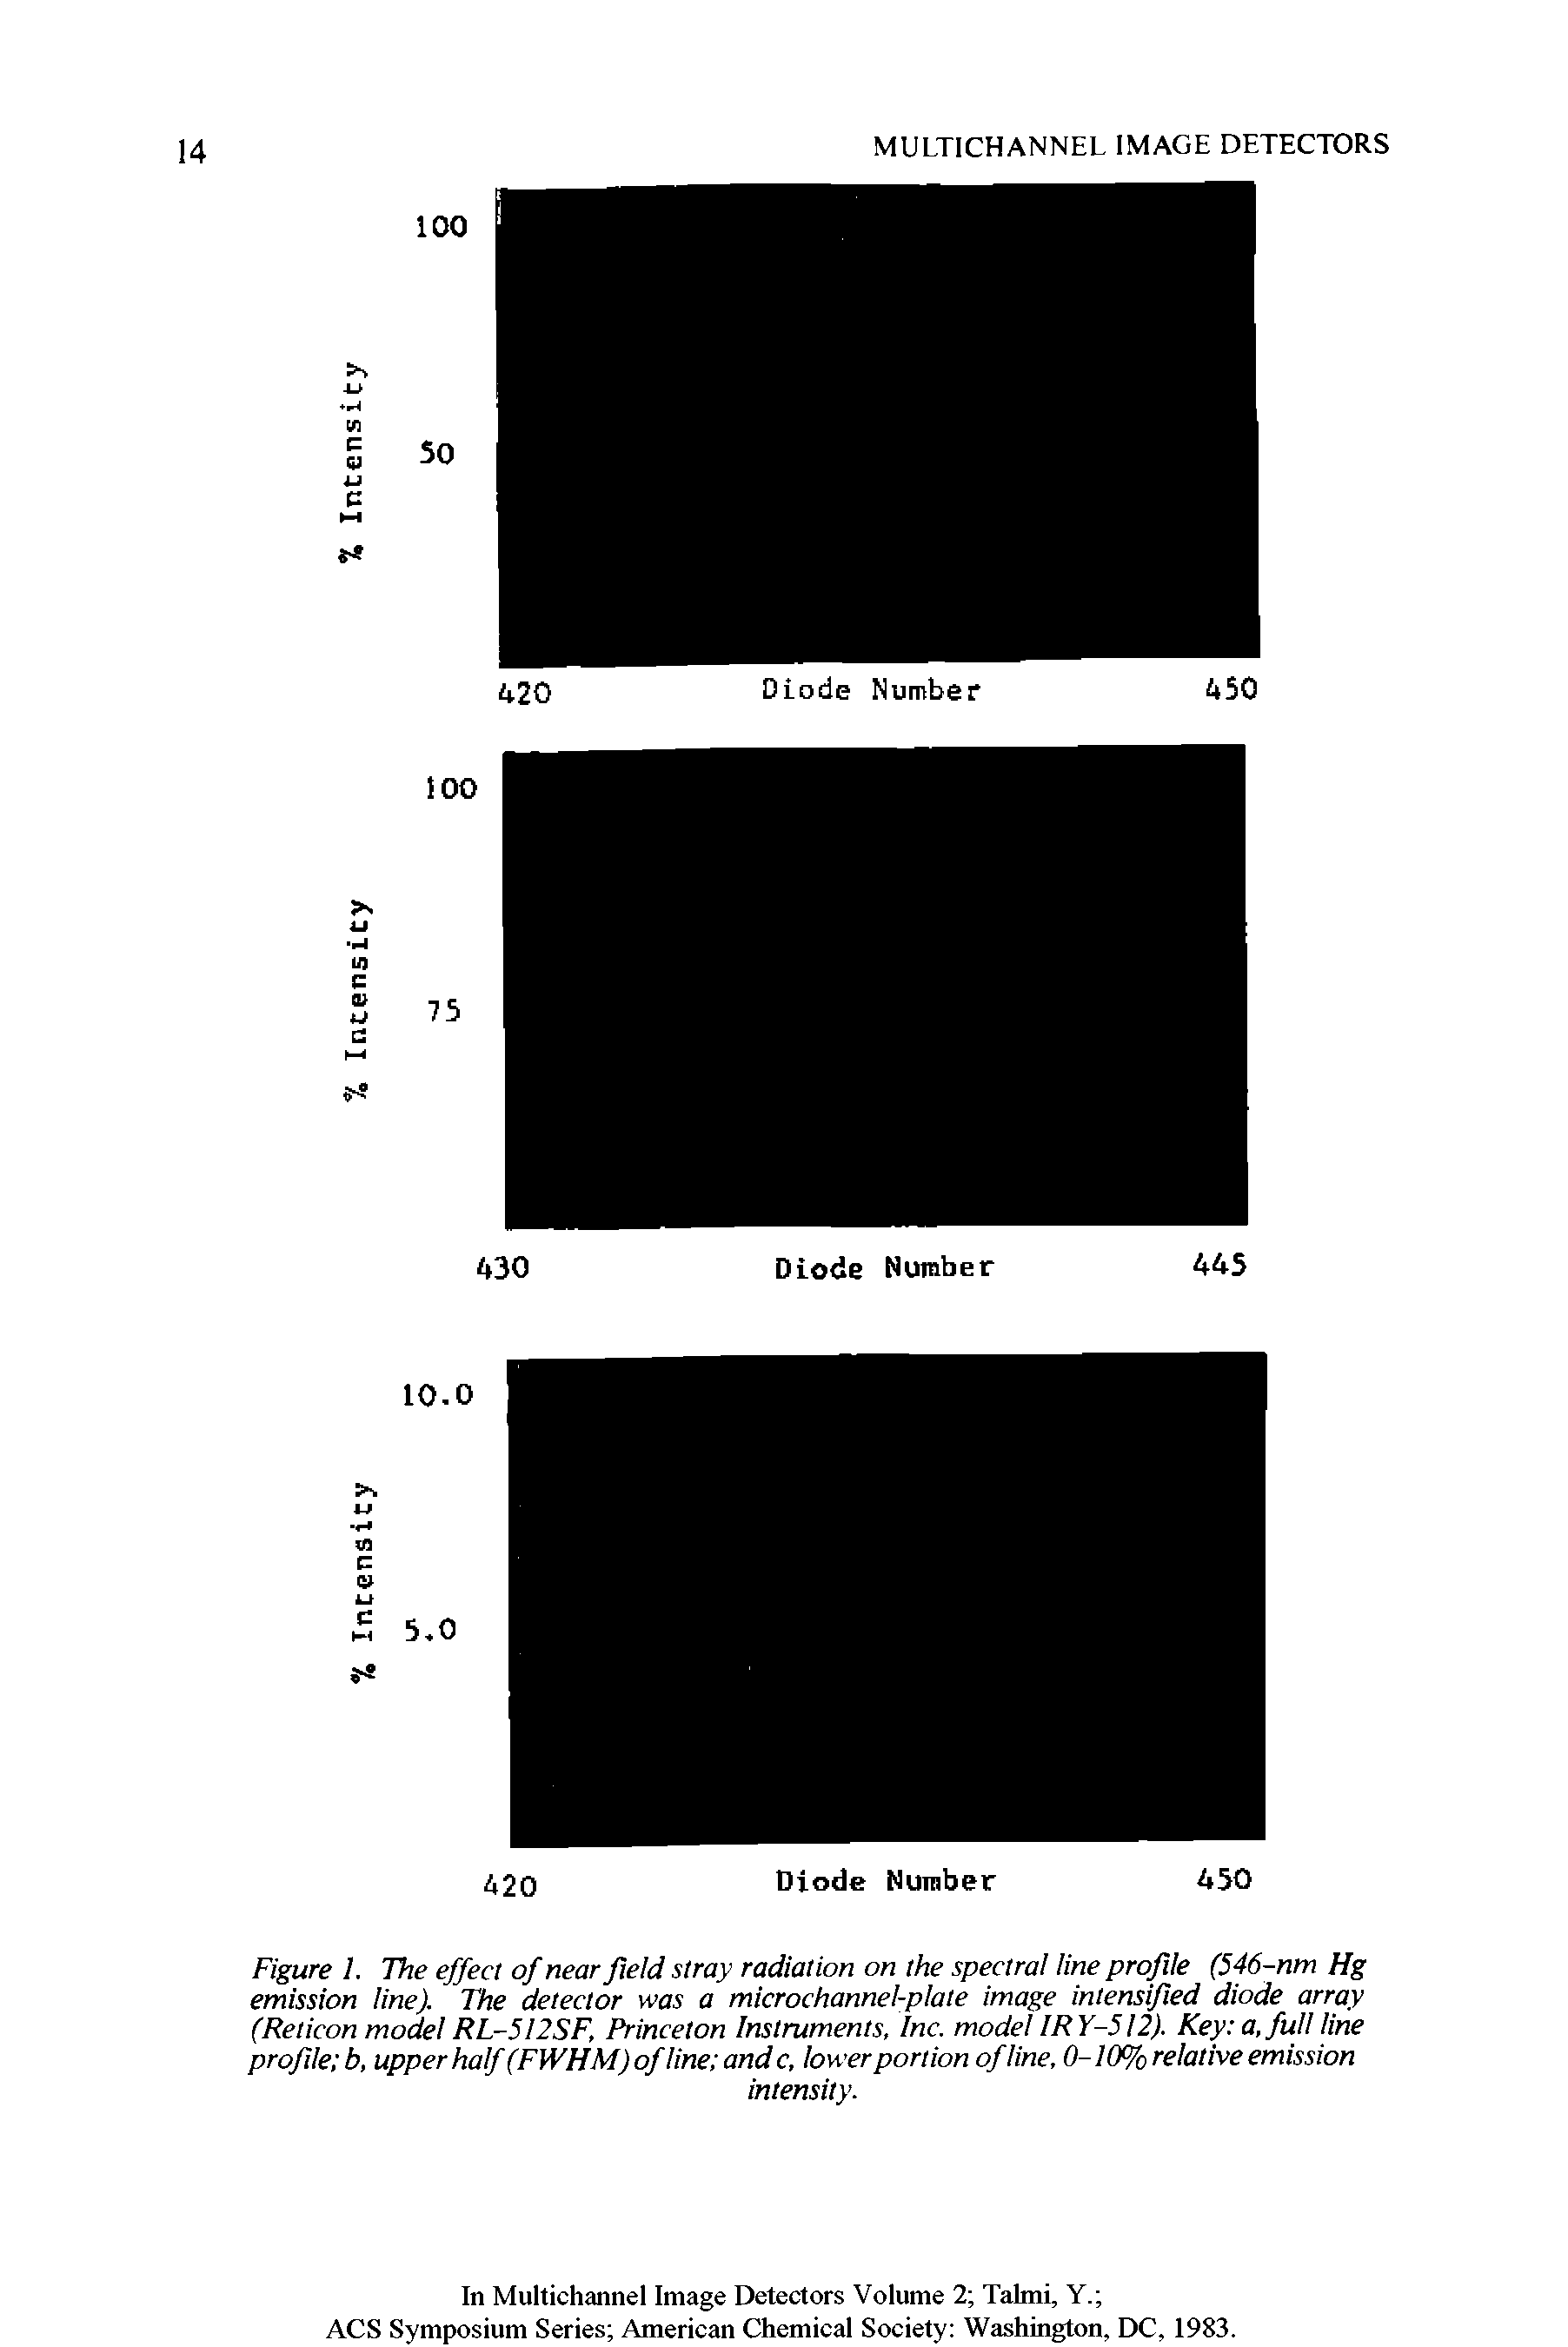 Figure 1. The effect of near field stray radiation on the spectral line profile (546-nm Hg emission line). The detector was a microchannel-plate image intensified diode array (Reticon model RL-5I2SF, Princeton Instruments, Inc. model IRY-512). Key a, full line profile b, upper half (FWHM)ofline andc, lower portion of line, 0-10% relative emission...